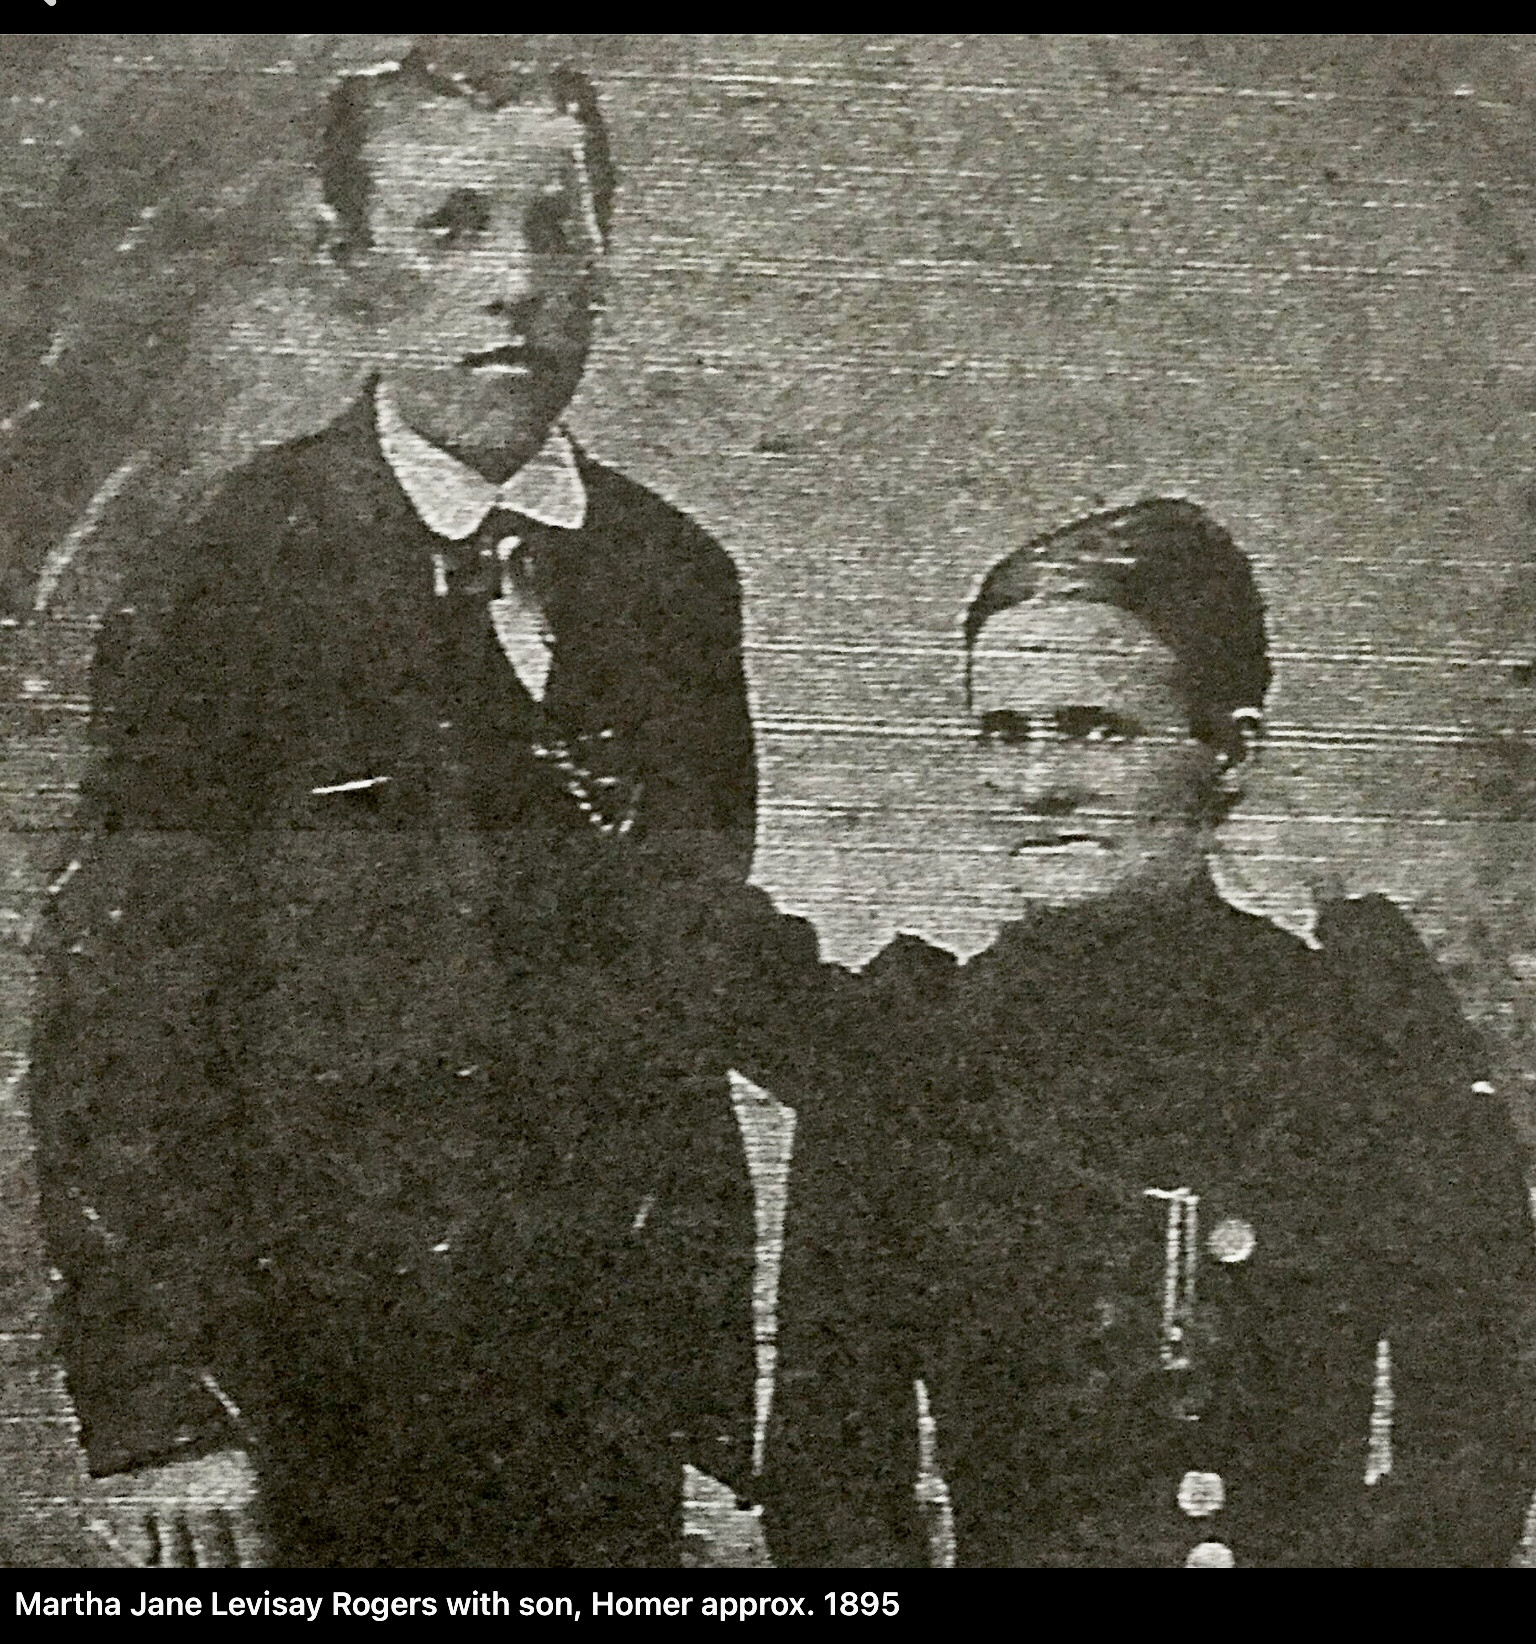 Martha Jane (Levisay) Rogers and youngest son, Homer